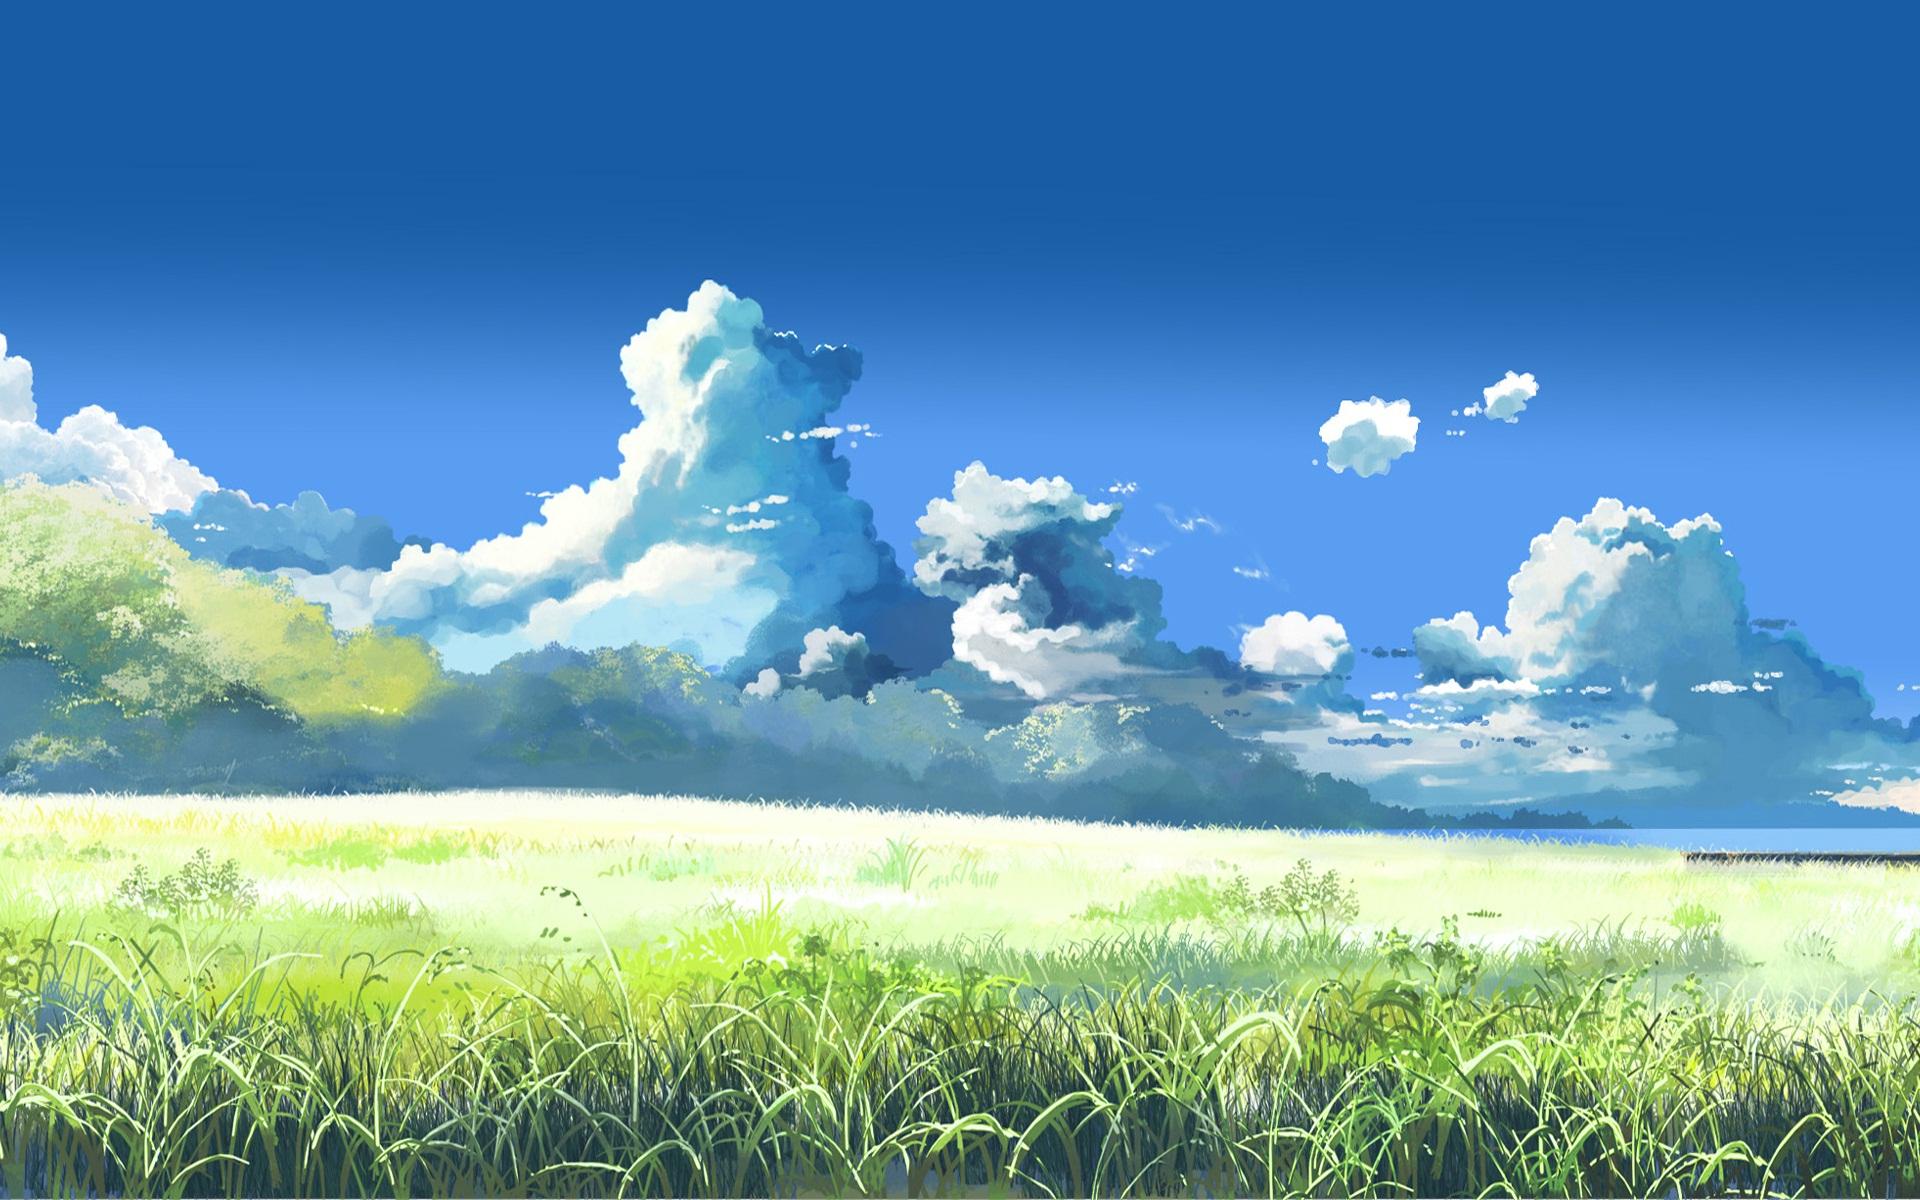 Anime Landscape Stock Photos, Images and Backgrounds for Free Download-demhanvico.com.vn